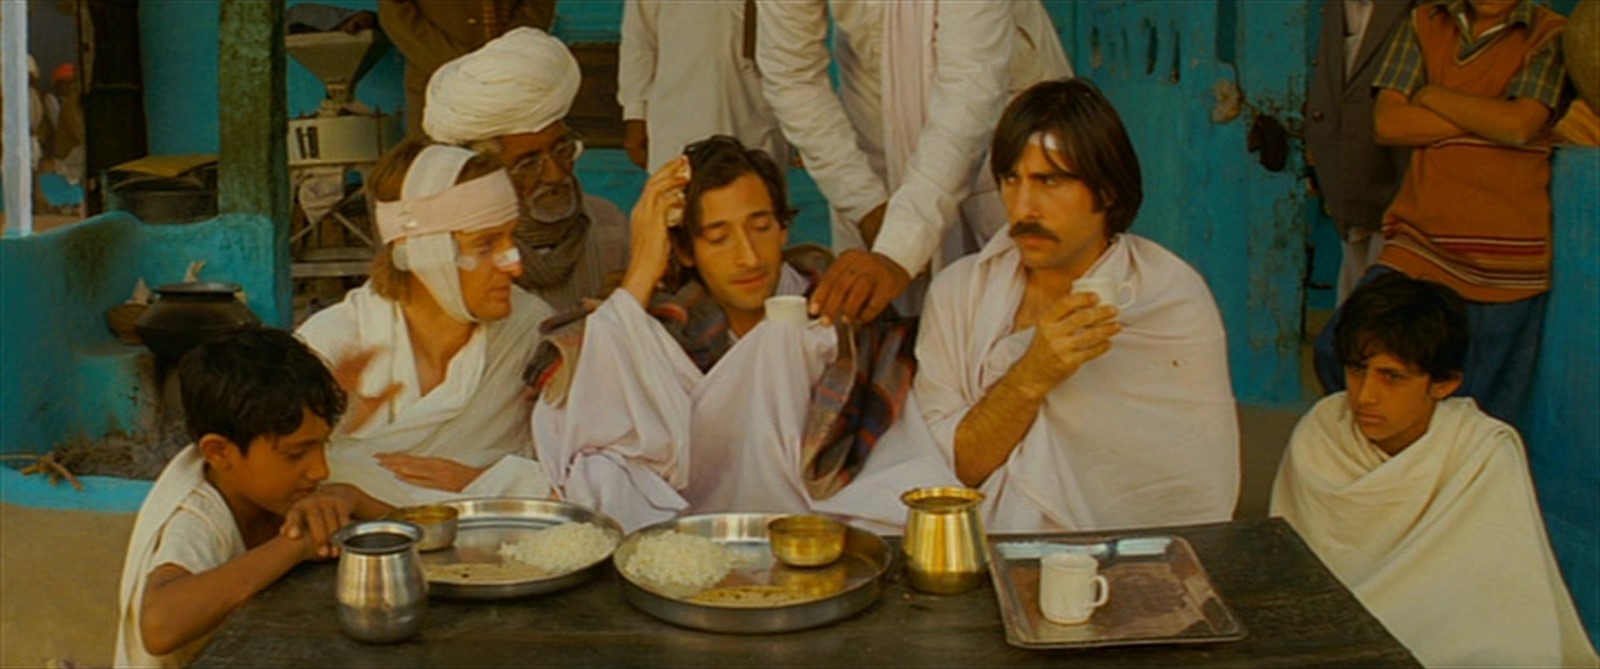 How The Darjeeling Limited Explores Grief With Cross-Cultural